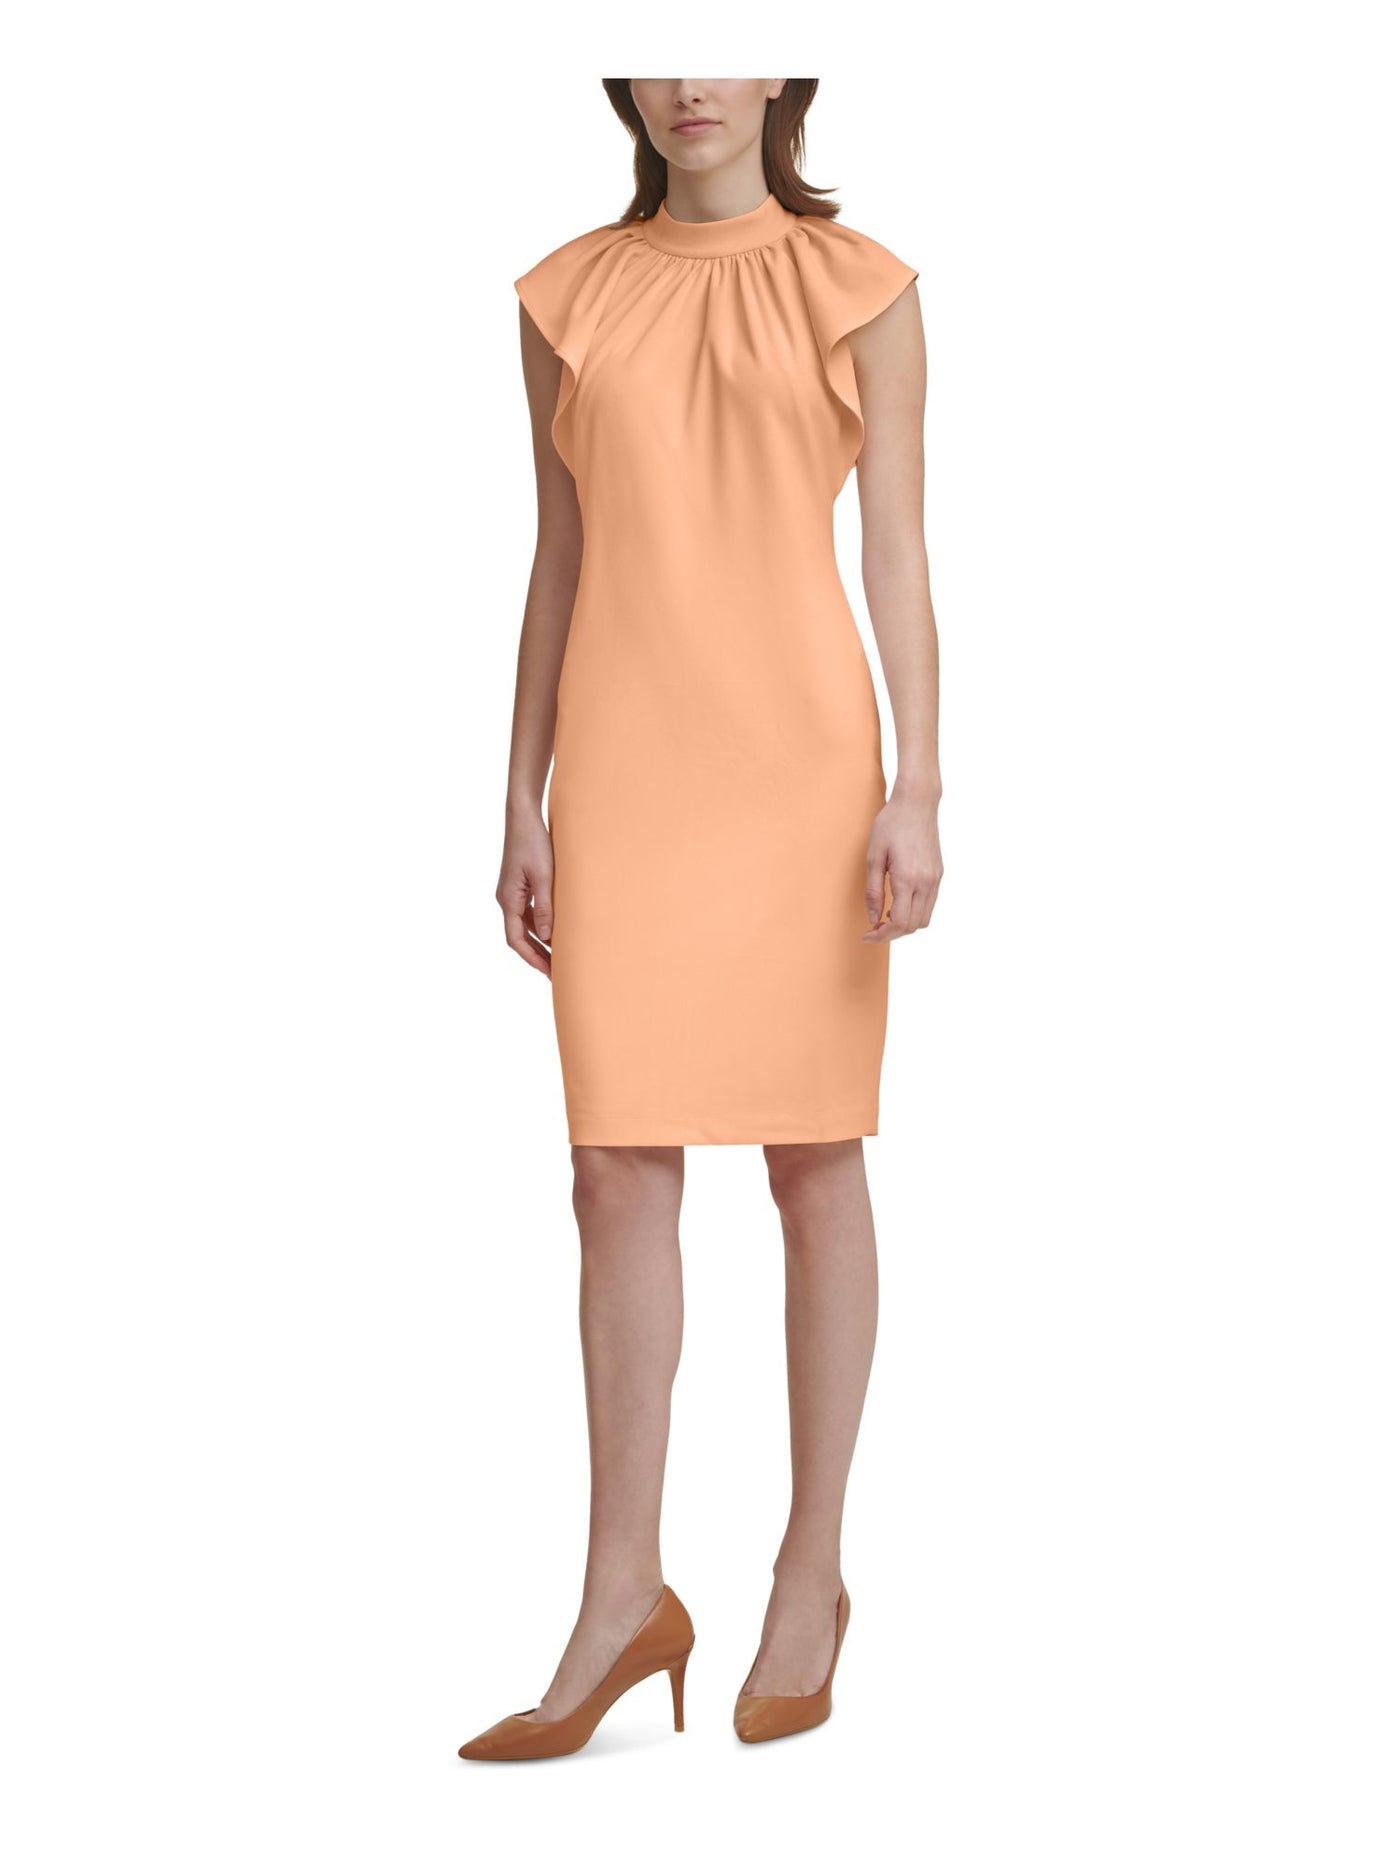 CALVIN KLEIN Womens Coral Stretch Zippered Ruffled Pleated Flutter Sleeve Mock Neck Above The Knee Party Sheath Dress Petites 4P